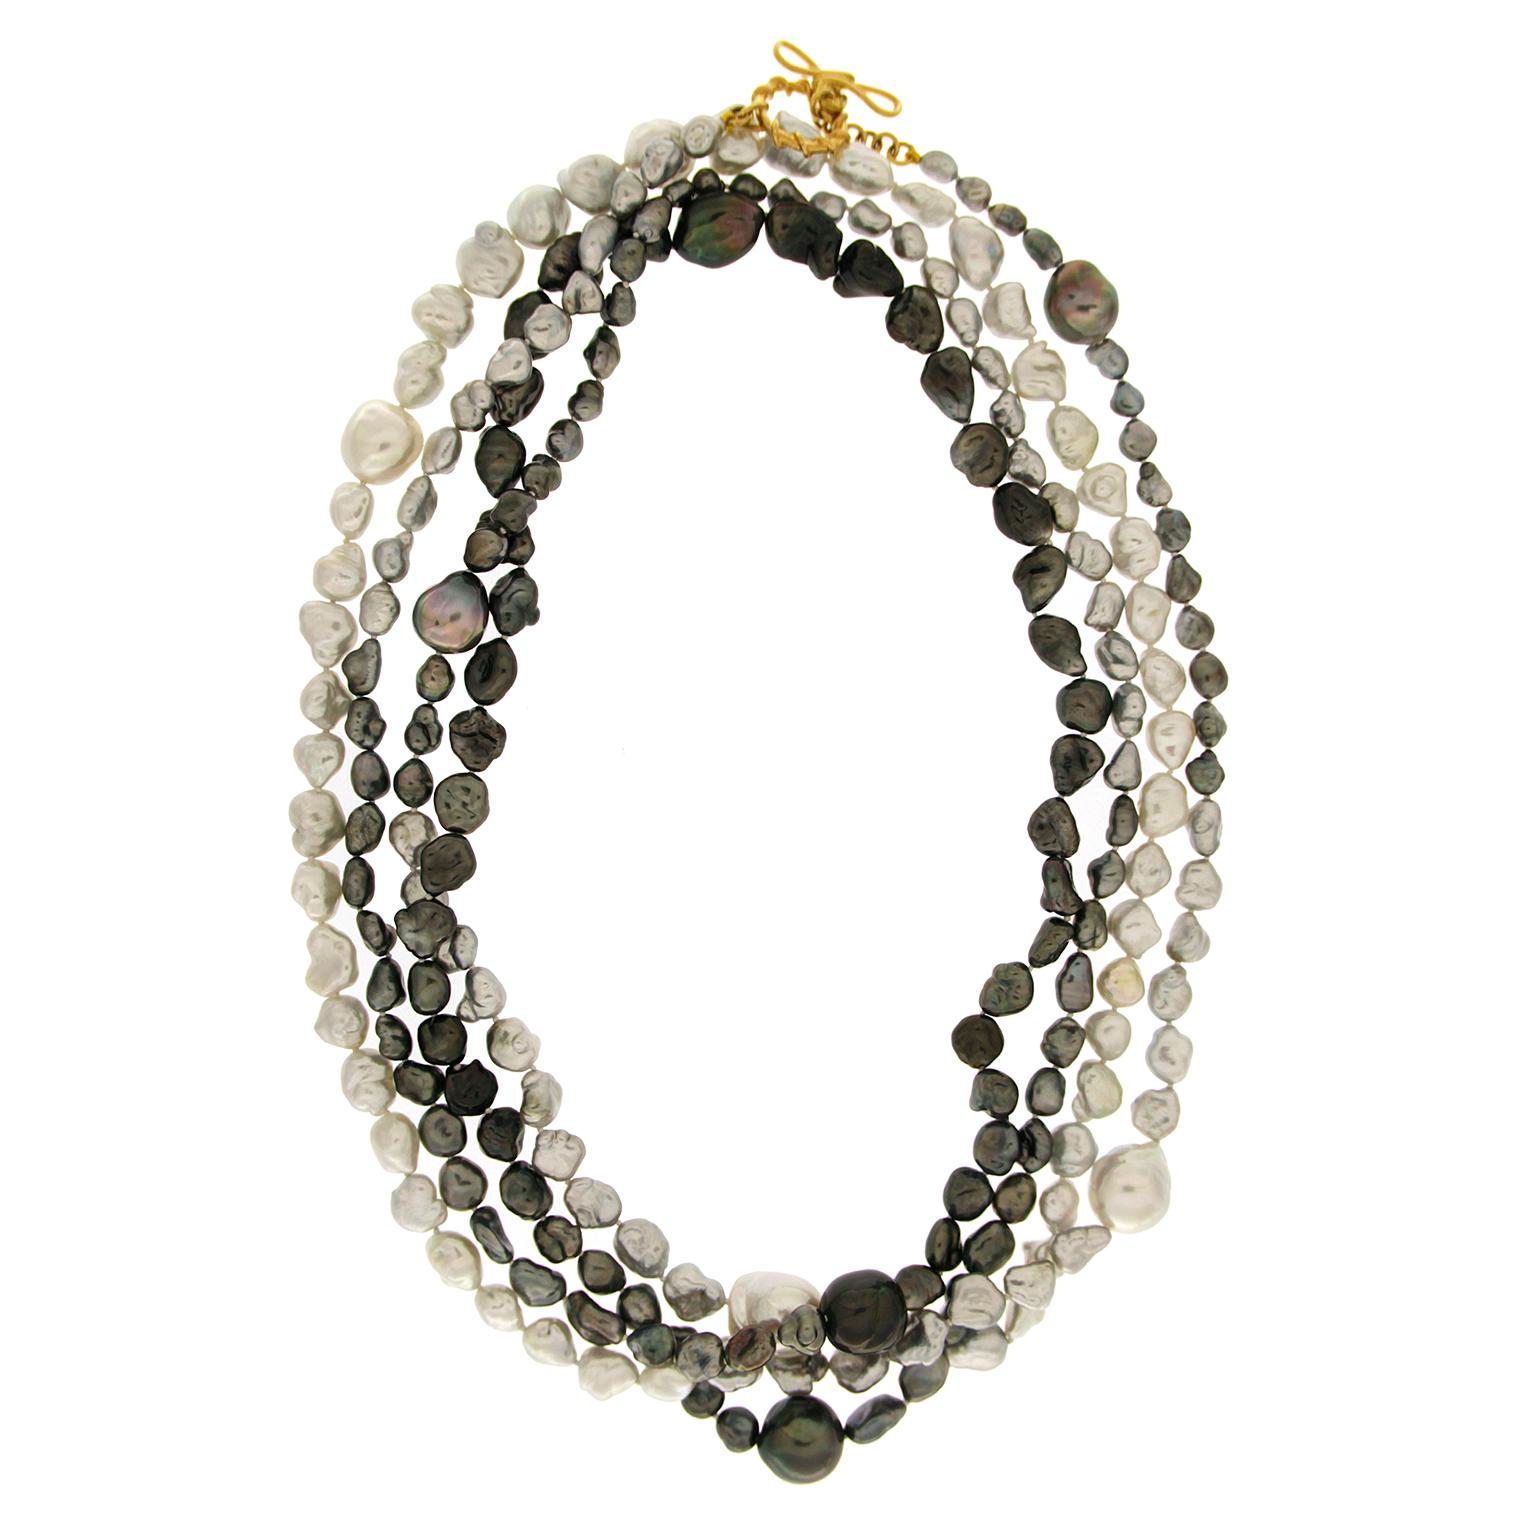 Black and white,  large and small keshi pearl necklace  -  54 inches long - with medium mariner ring and knot toggle in 18kt yellow gold